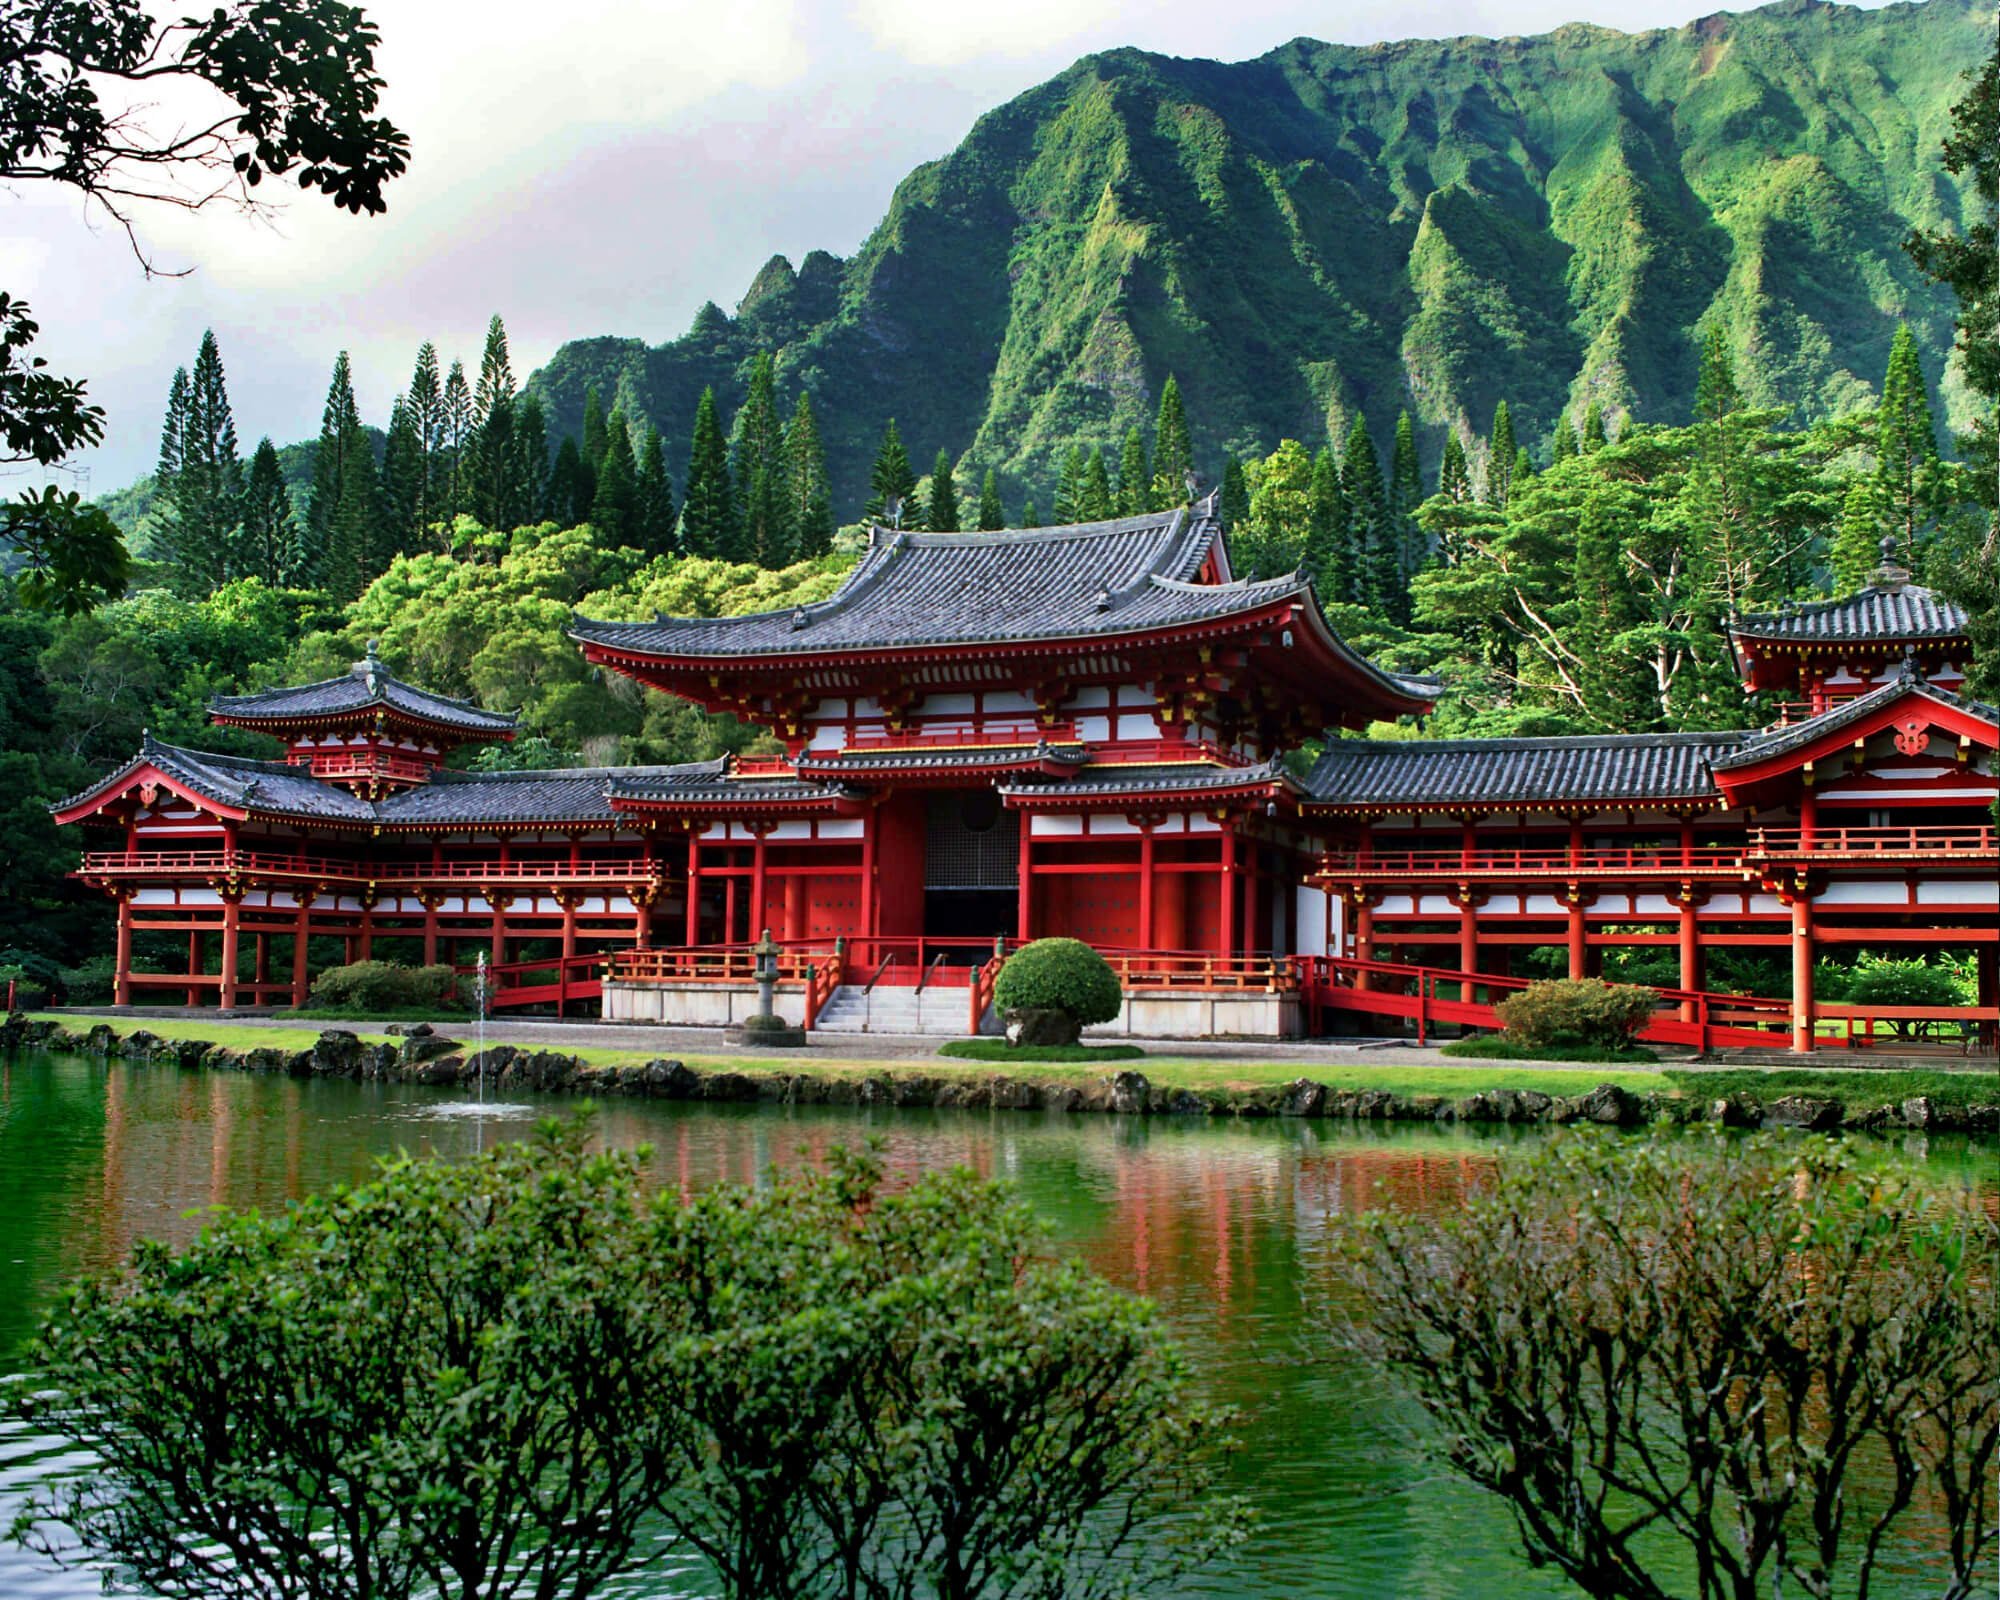 A Buddhist temple with intricate details is surrounded by lush green mountains and a tranquil reflecting pond.